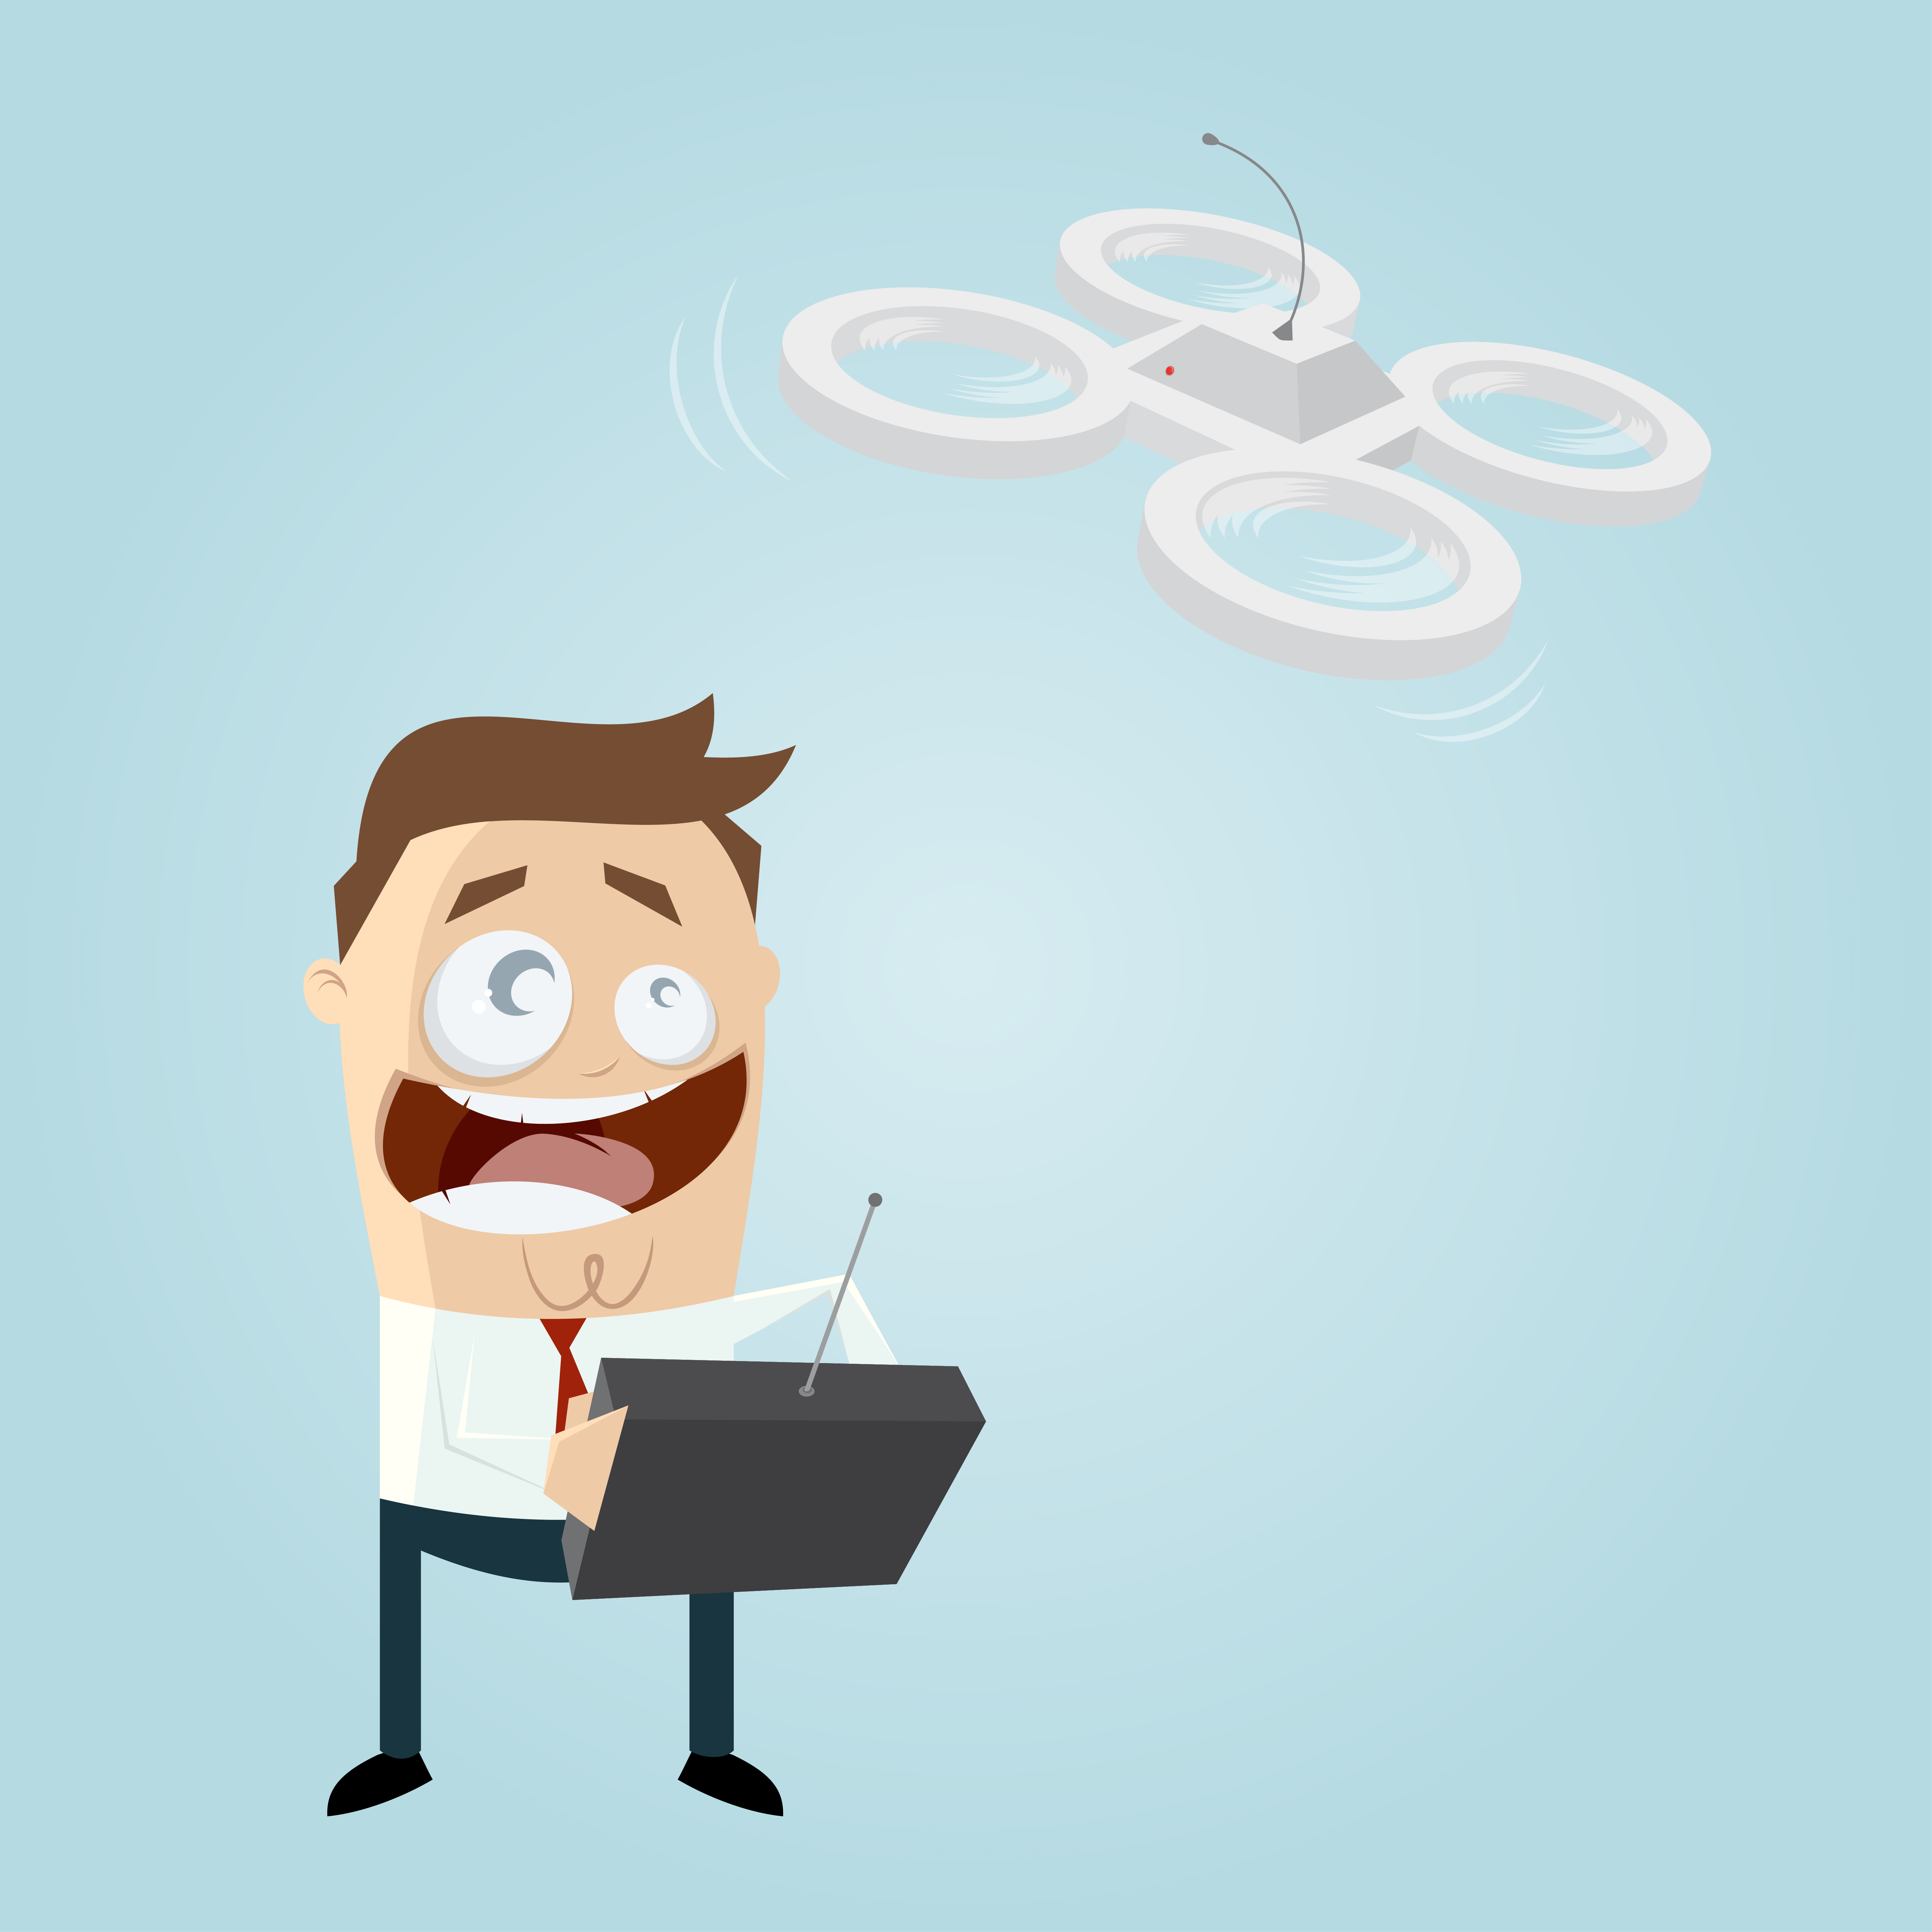 Quadcopter Beginner's Guide | Learn to Fly Drones